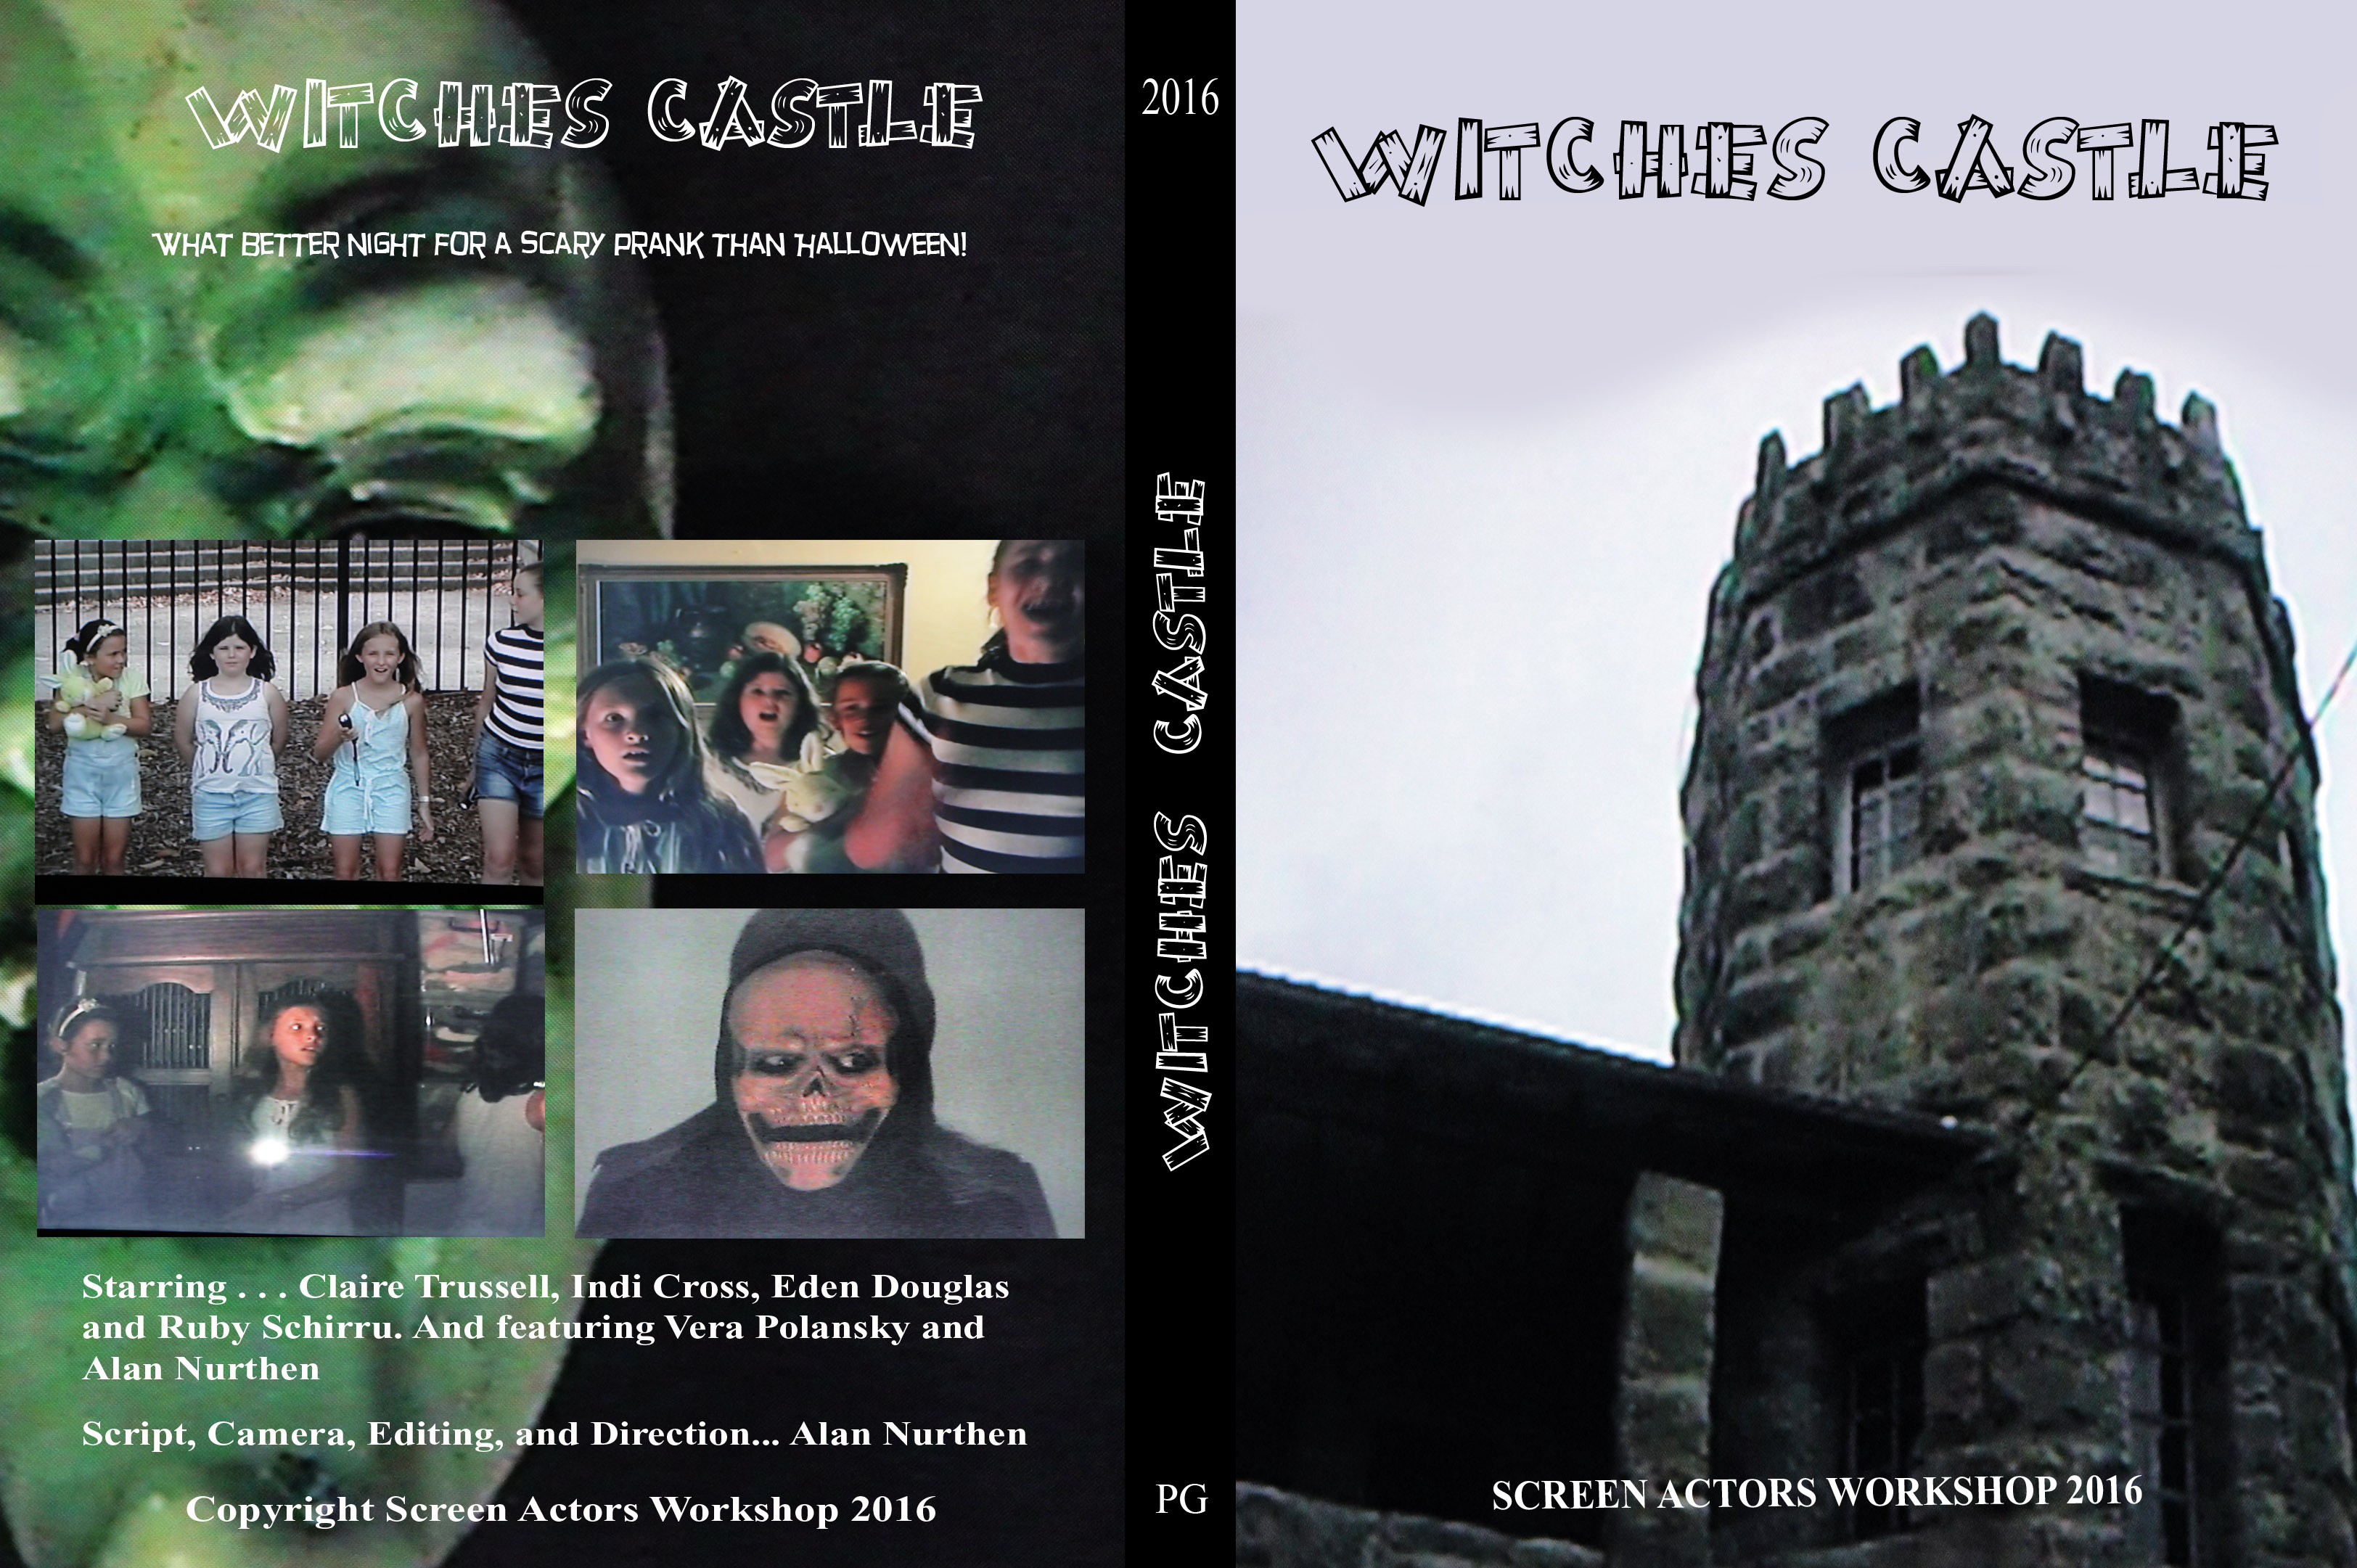 Witches Castle DVD slick